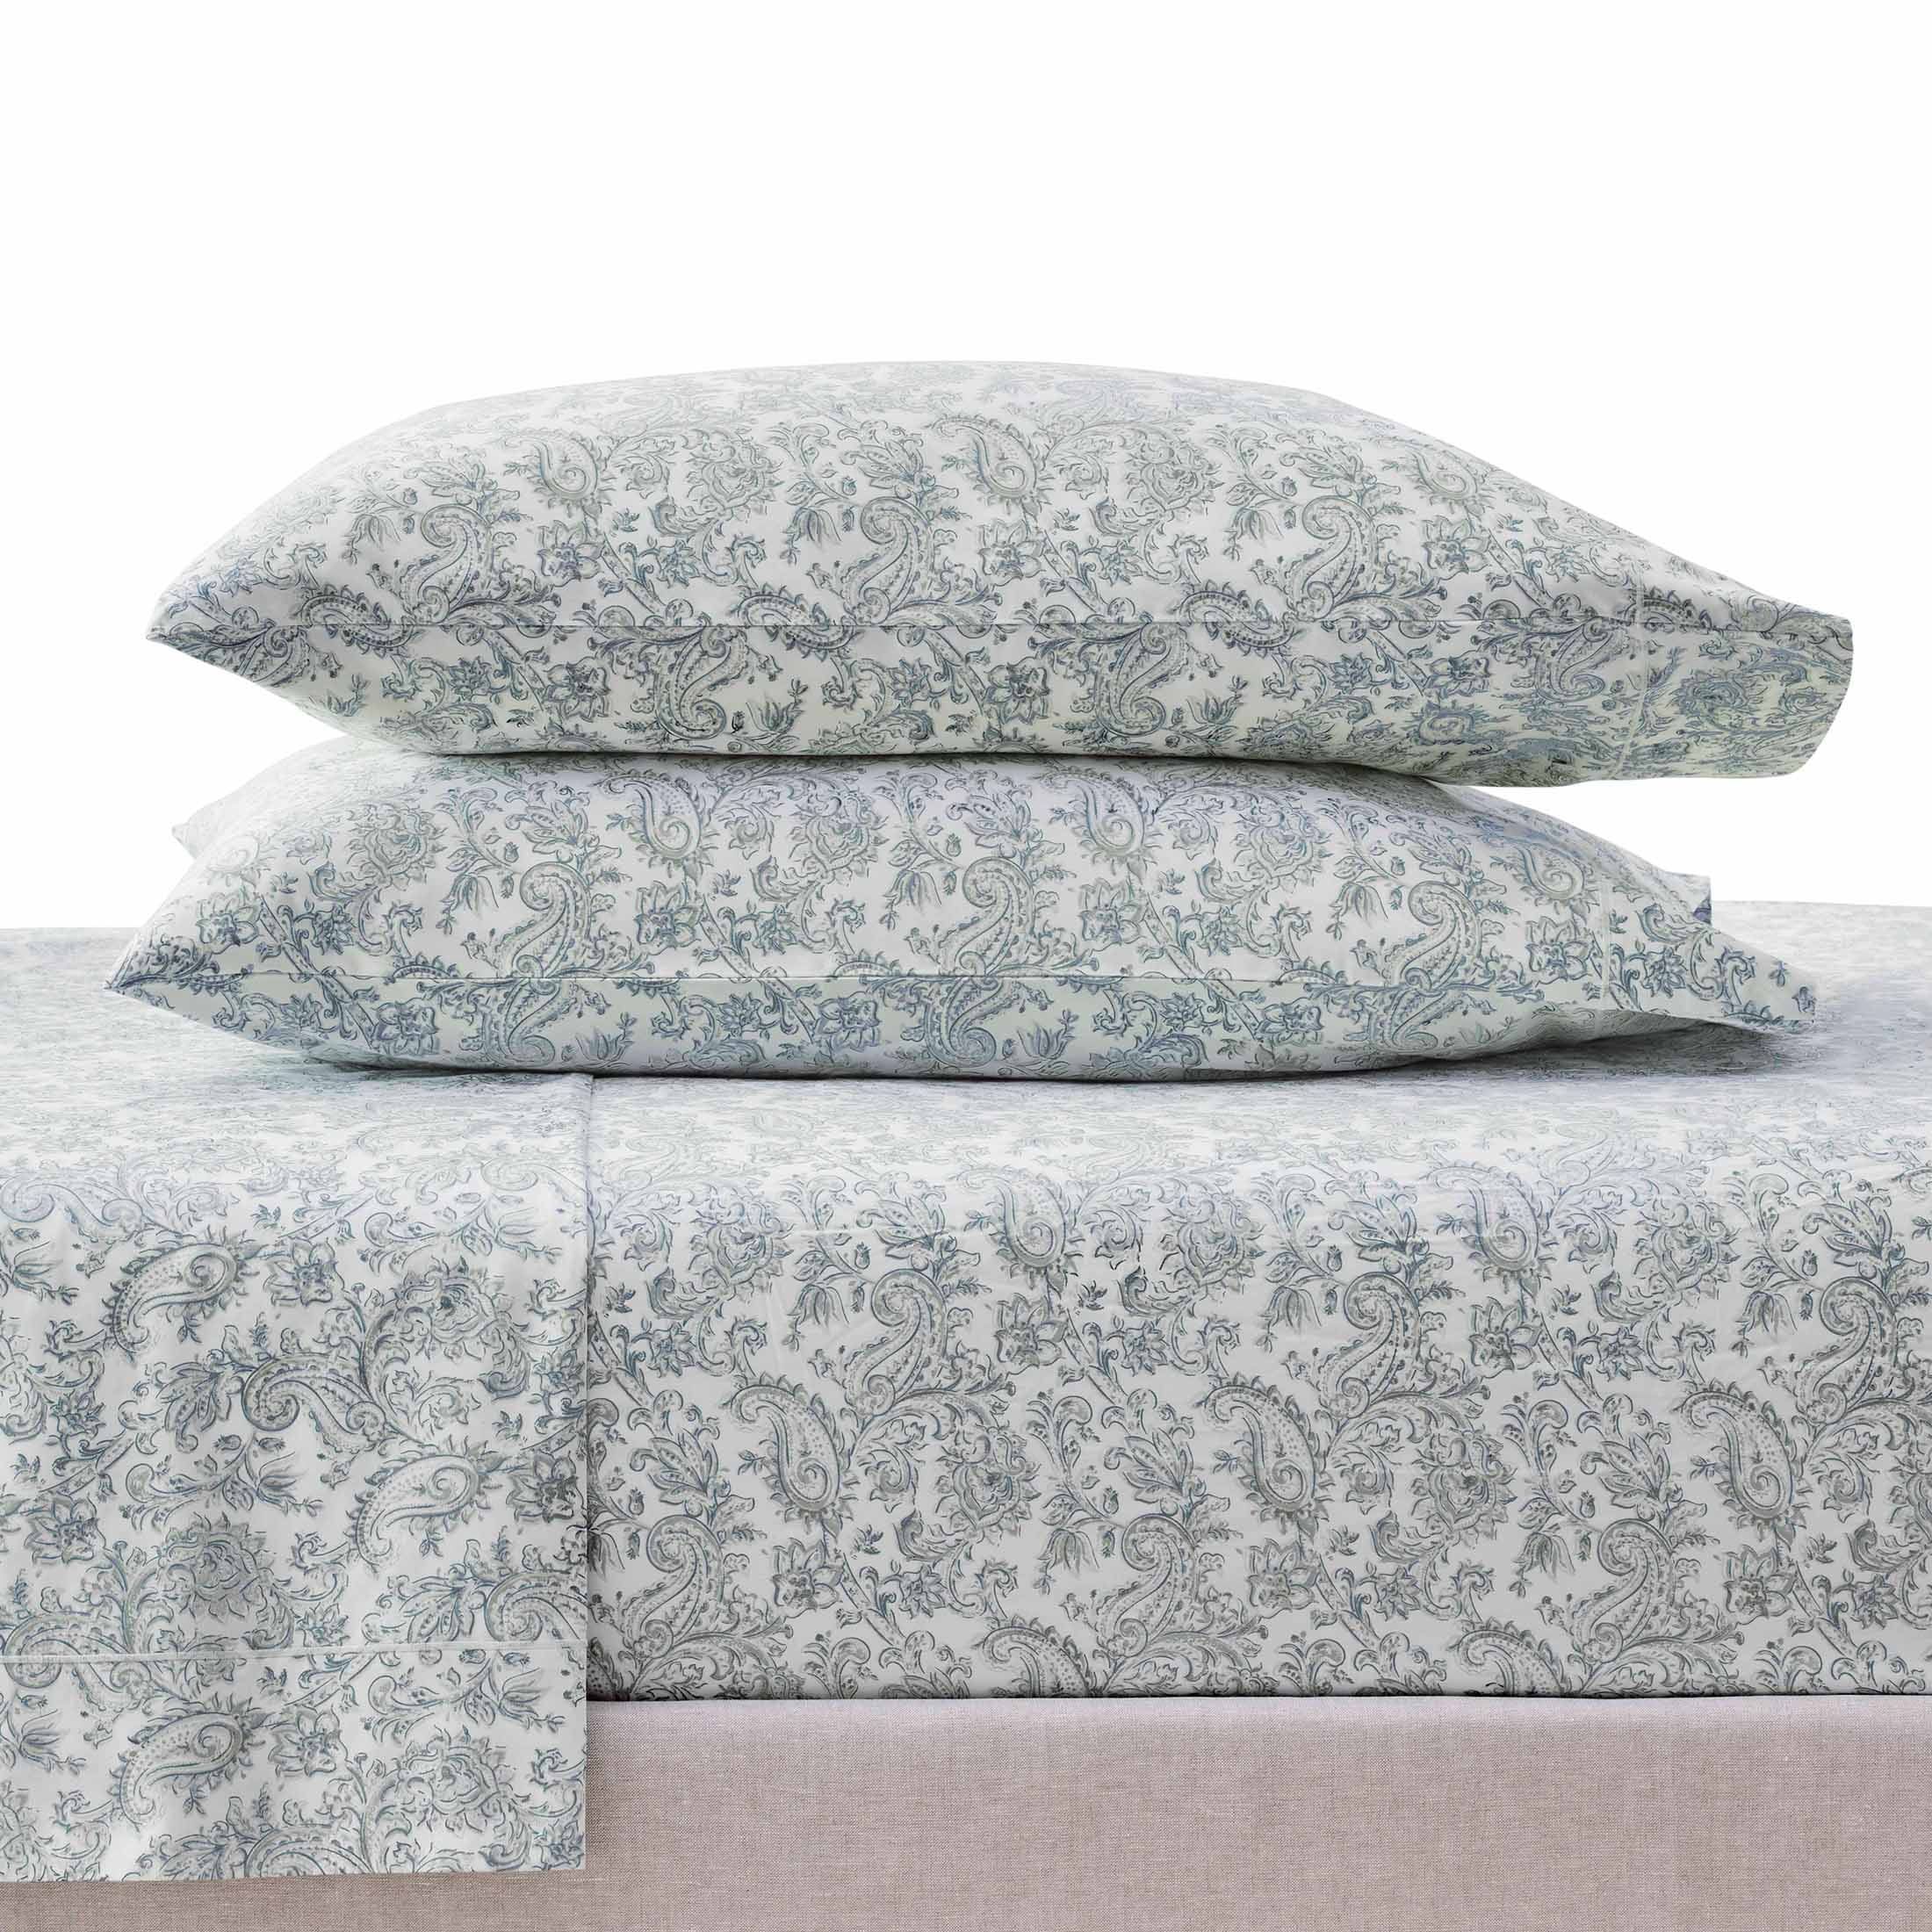 Better Homes & Gardens 400 Thread Count Performance Hygro Cotton Sheet Set, Paisley Taupe , Queen | Walmart (US)